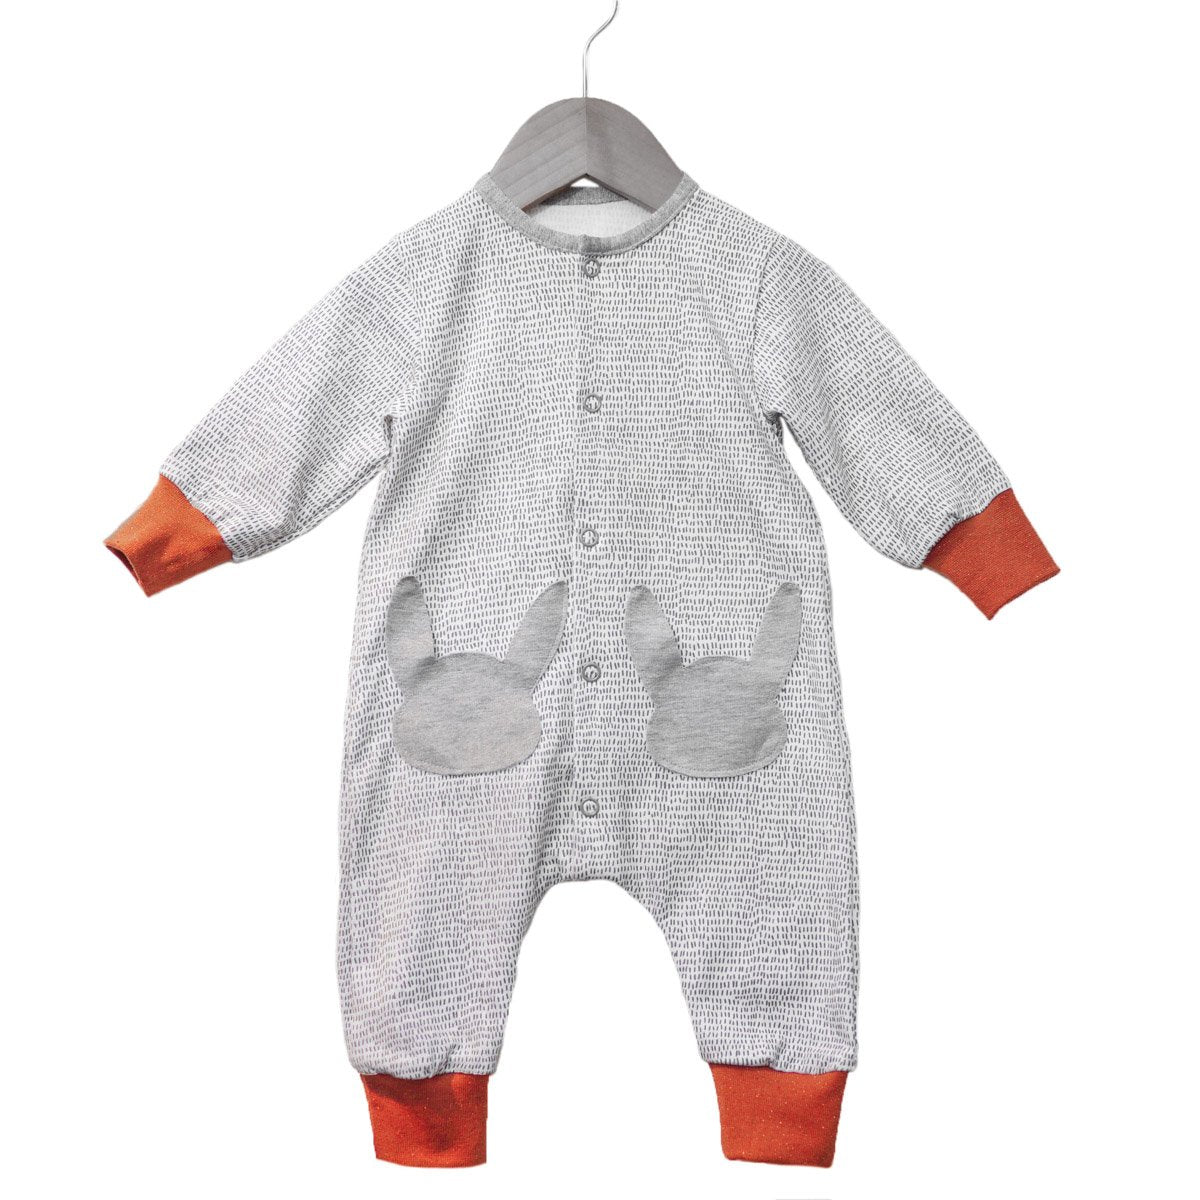 Ikatee - LISBOA jumpsuit / playsuit - Baby 6M/4Y - Paper Sewing Pattern